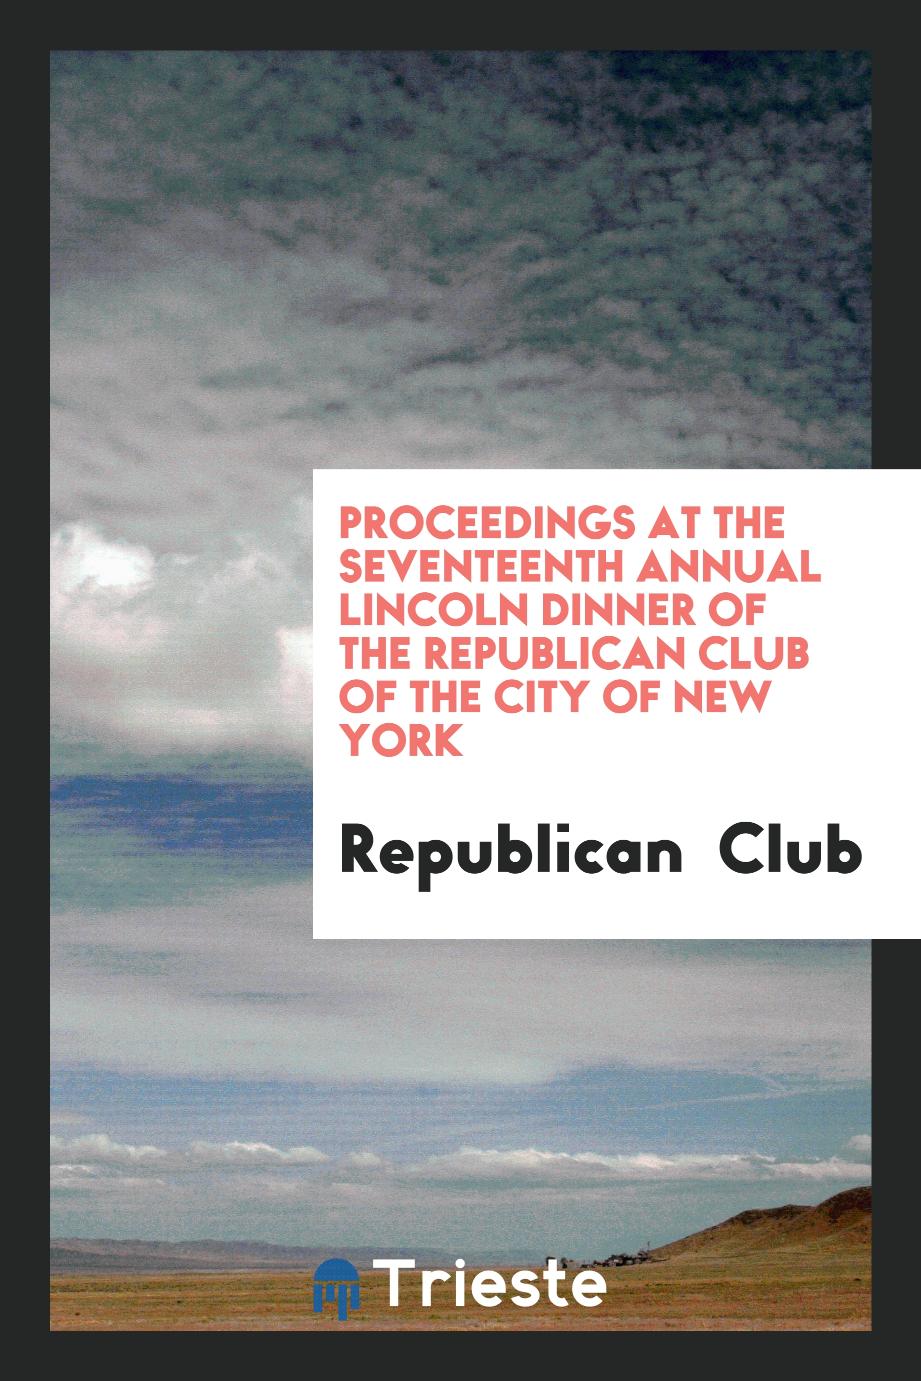 Proceedings at the seventeenth annual Lincoln dinner of the Republican Club of the city of New York